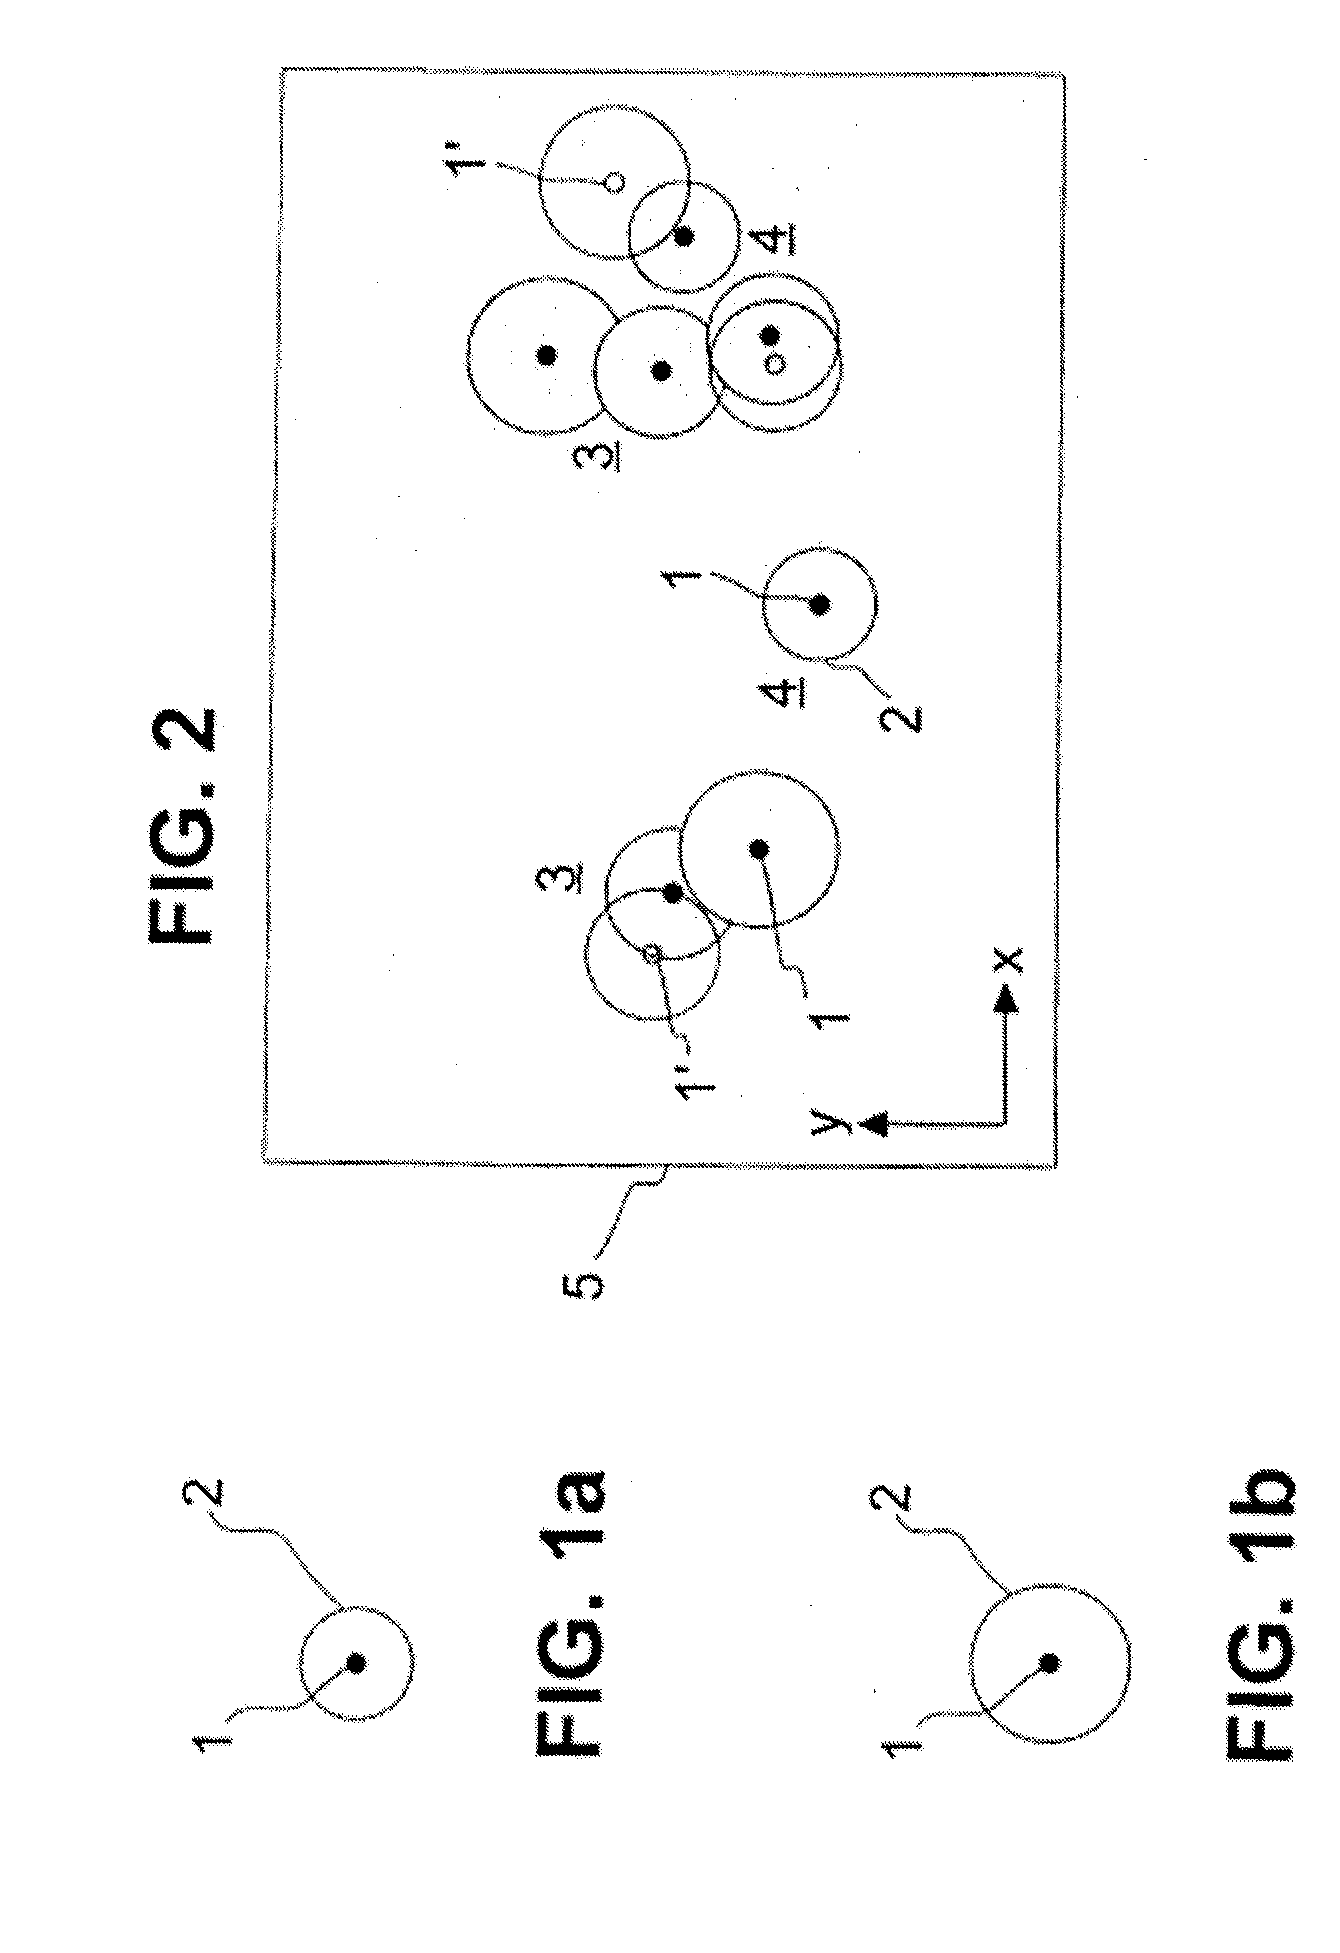 Method for High-Resolution 3D Localization Microscopy